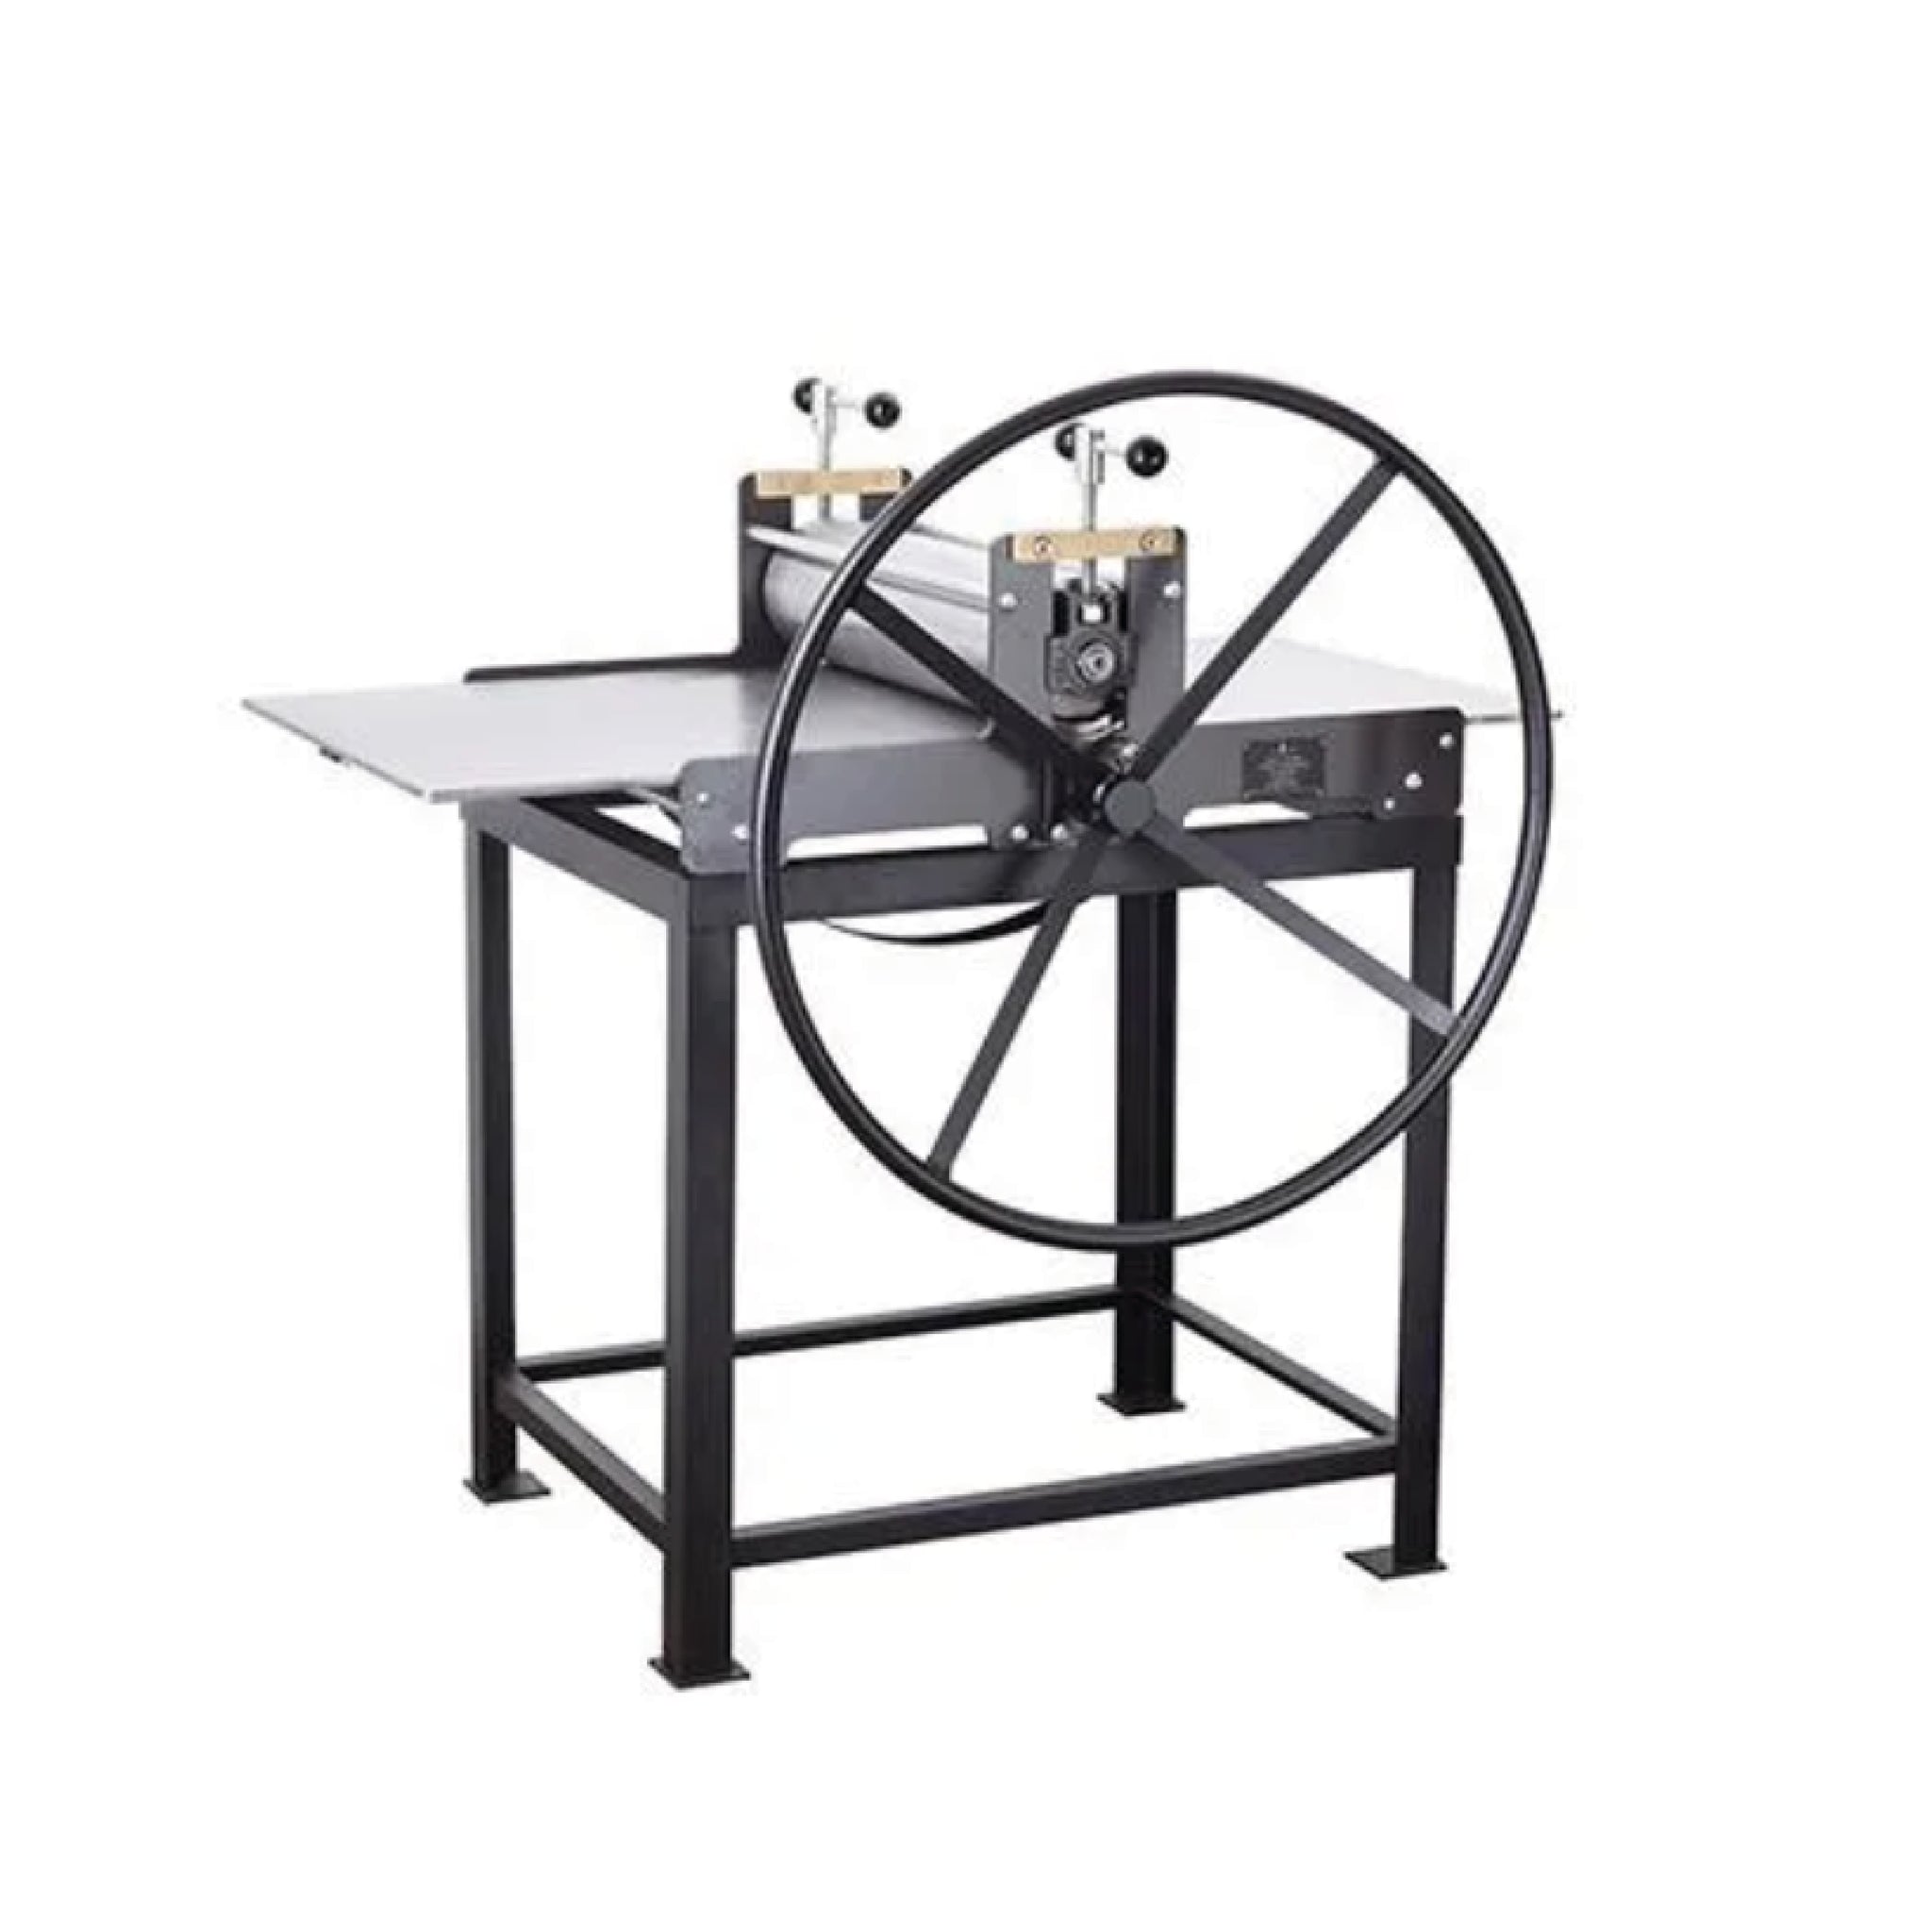 600 Direct Drive Press by Fitzroy Etching Presses - Melbourne Etching Supplies